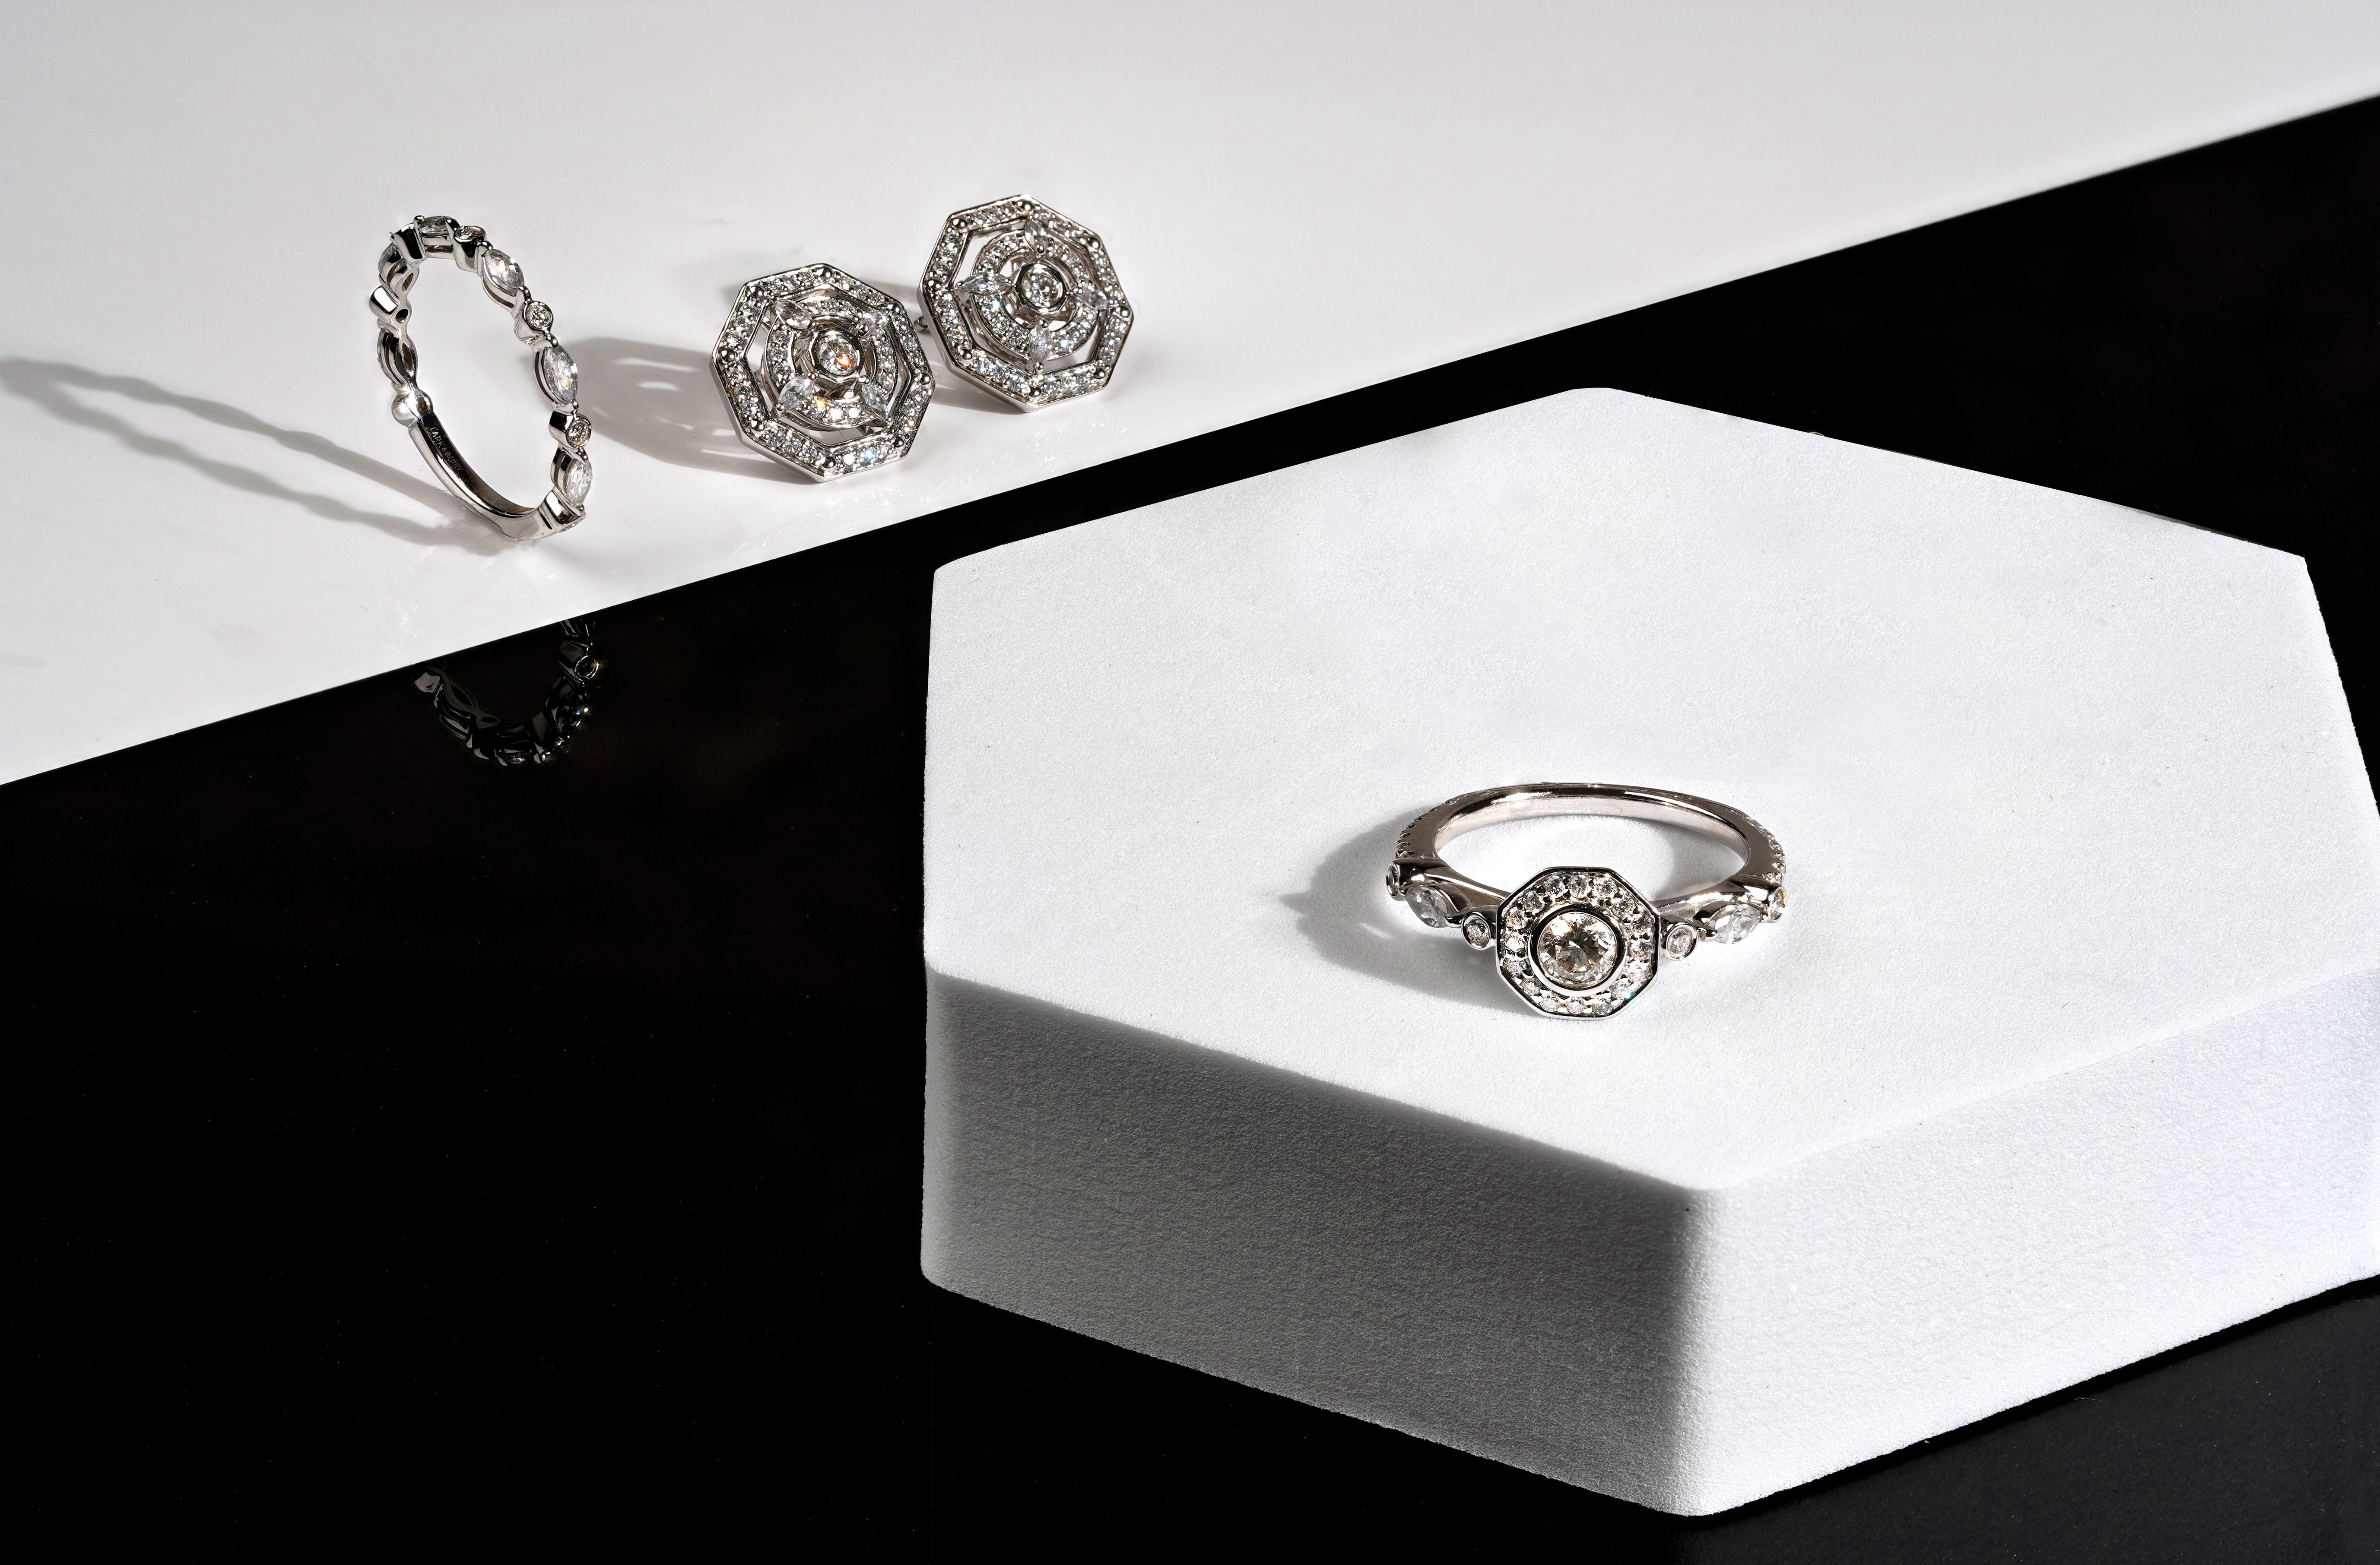 Rediscover the Aerides Jewellery Collection: Timeless Elegance in Octagonal Designs